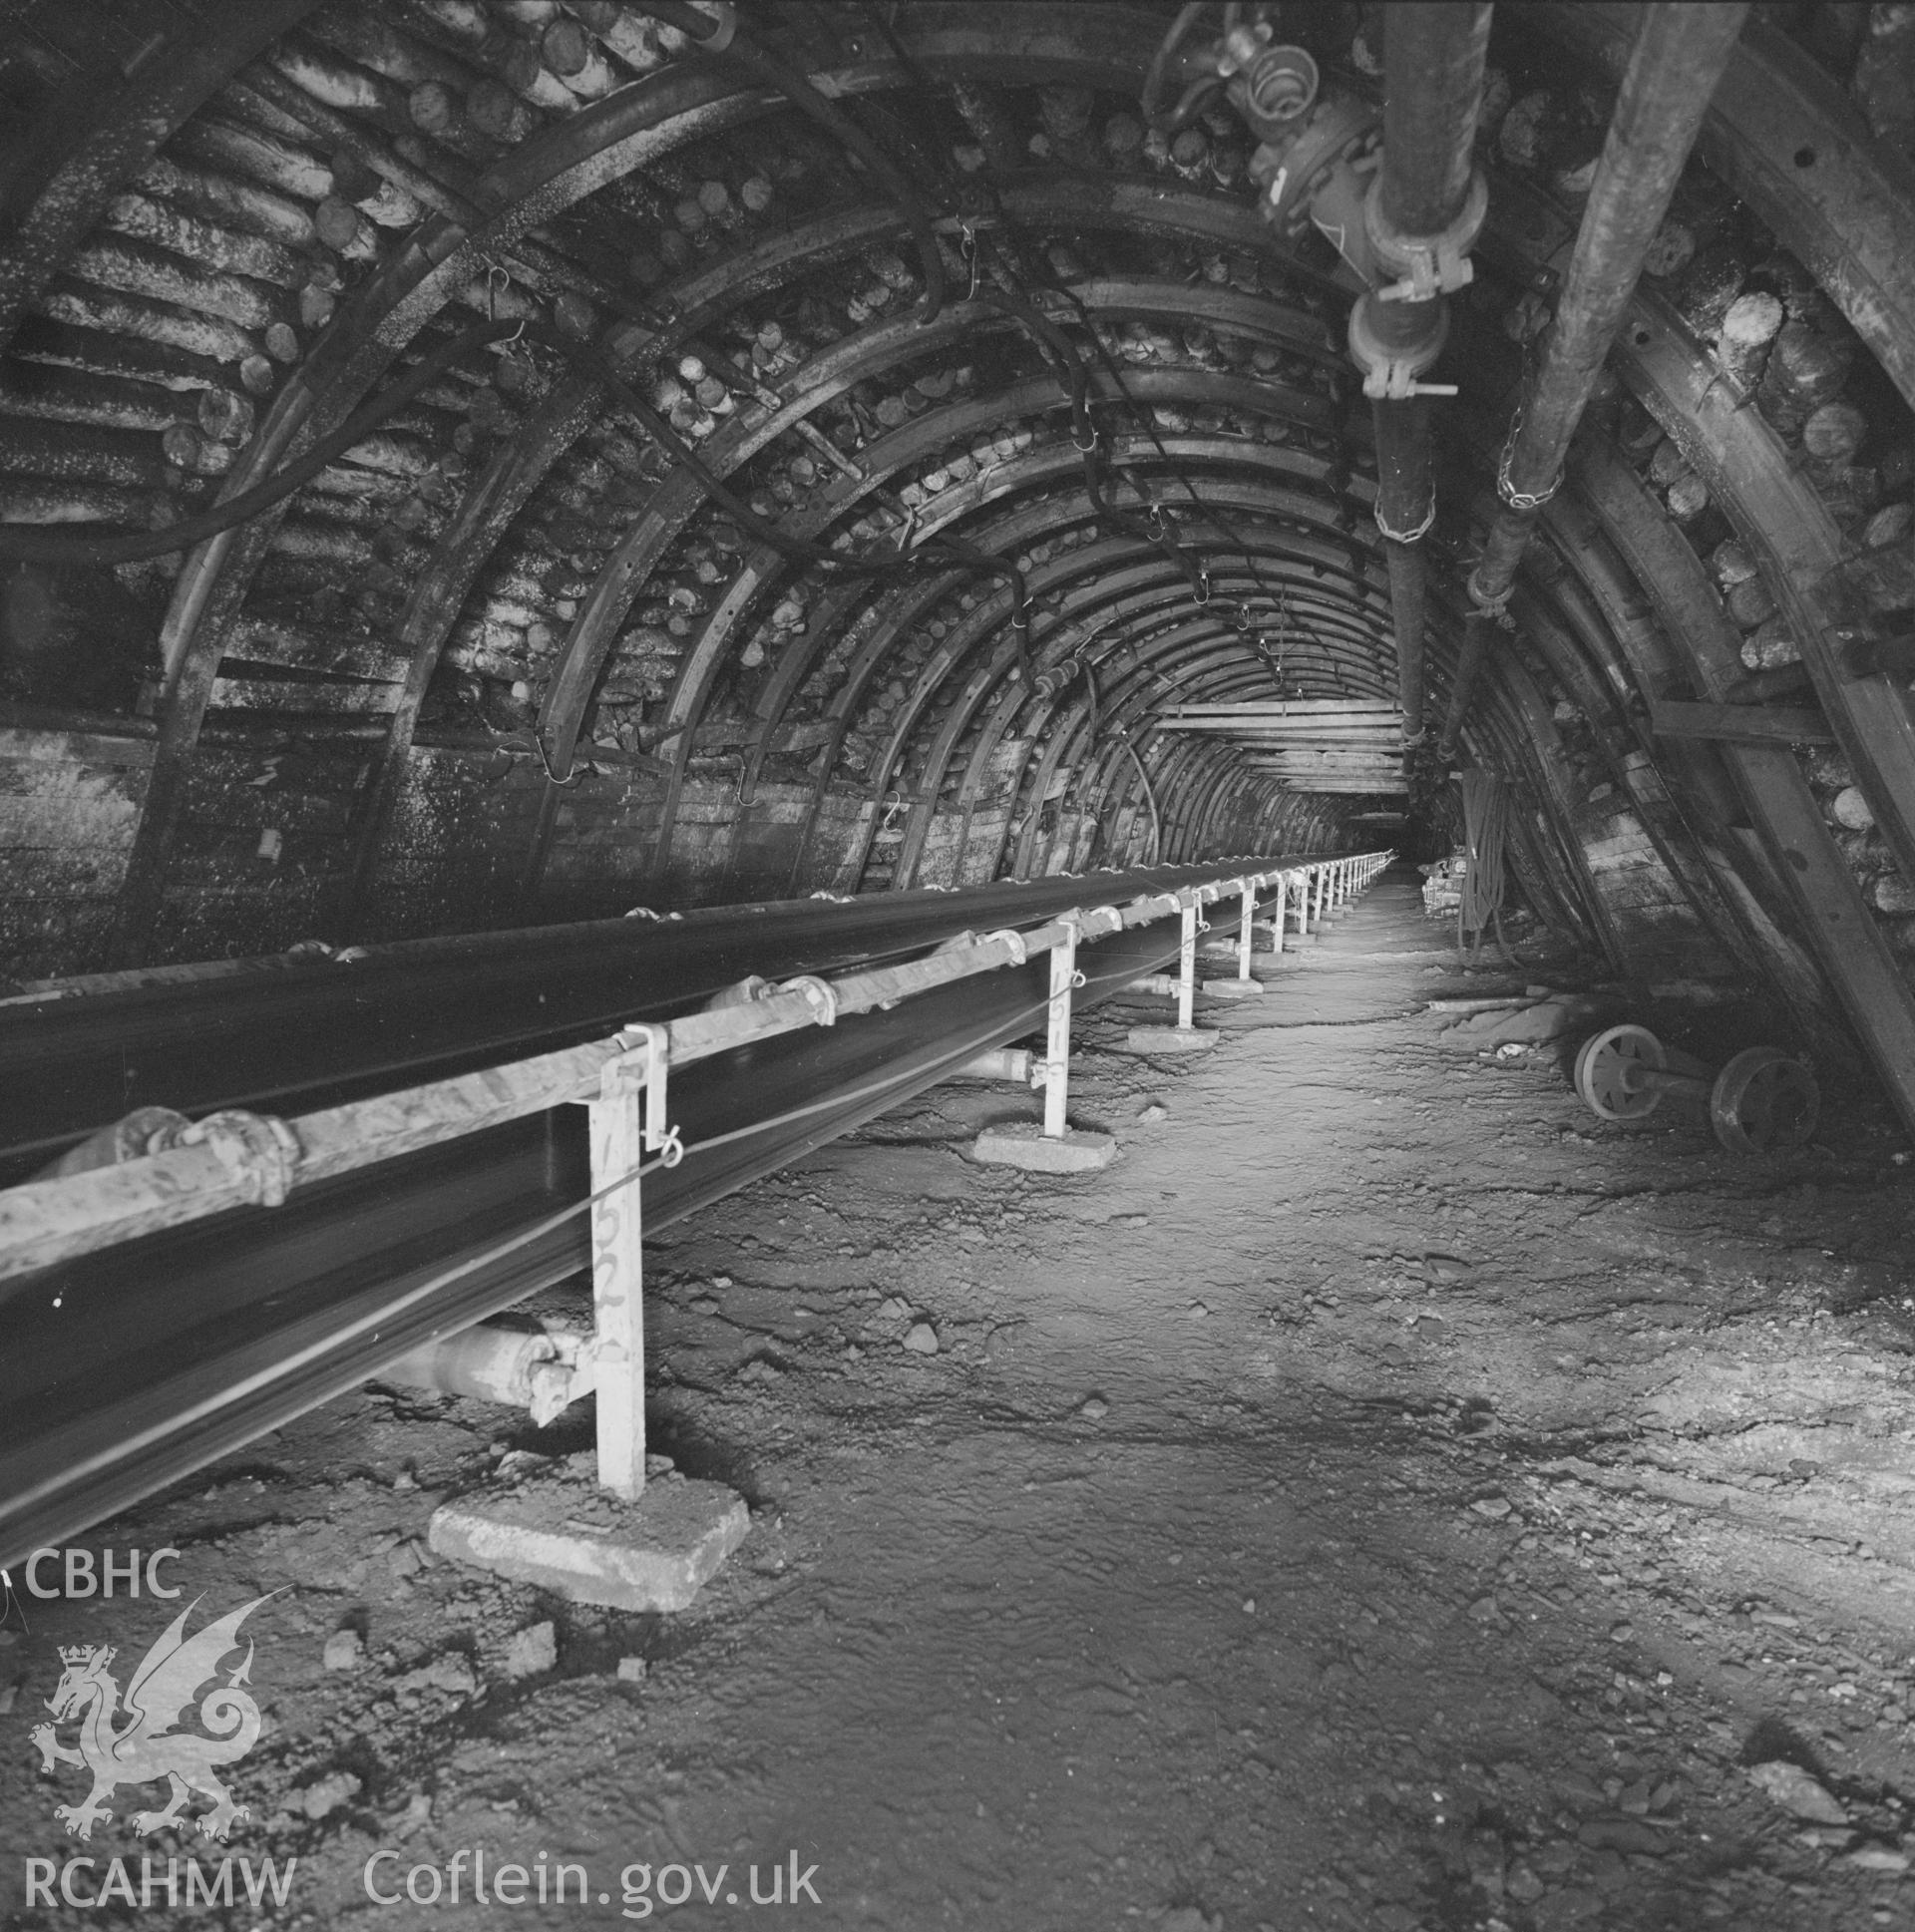 Digital copy of an acetate negative showing main trunk road with conveyor at Marine Colliery from the John Cornwell Collection.